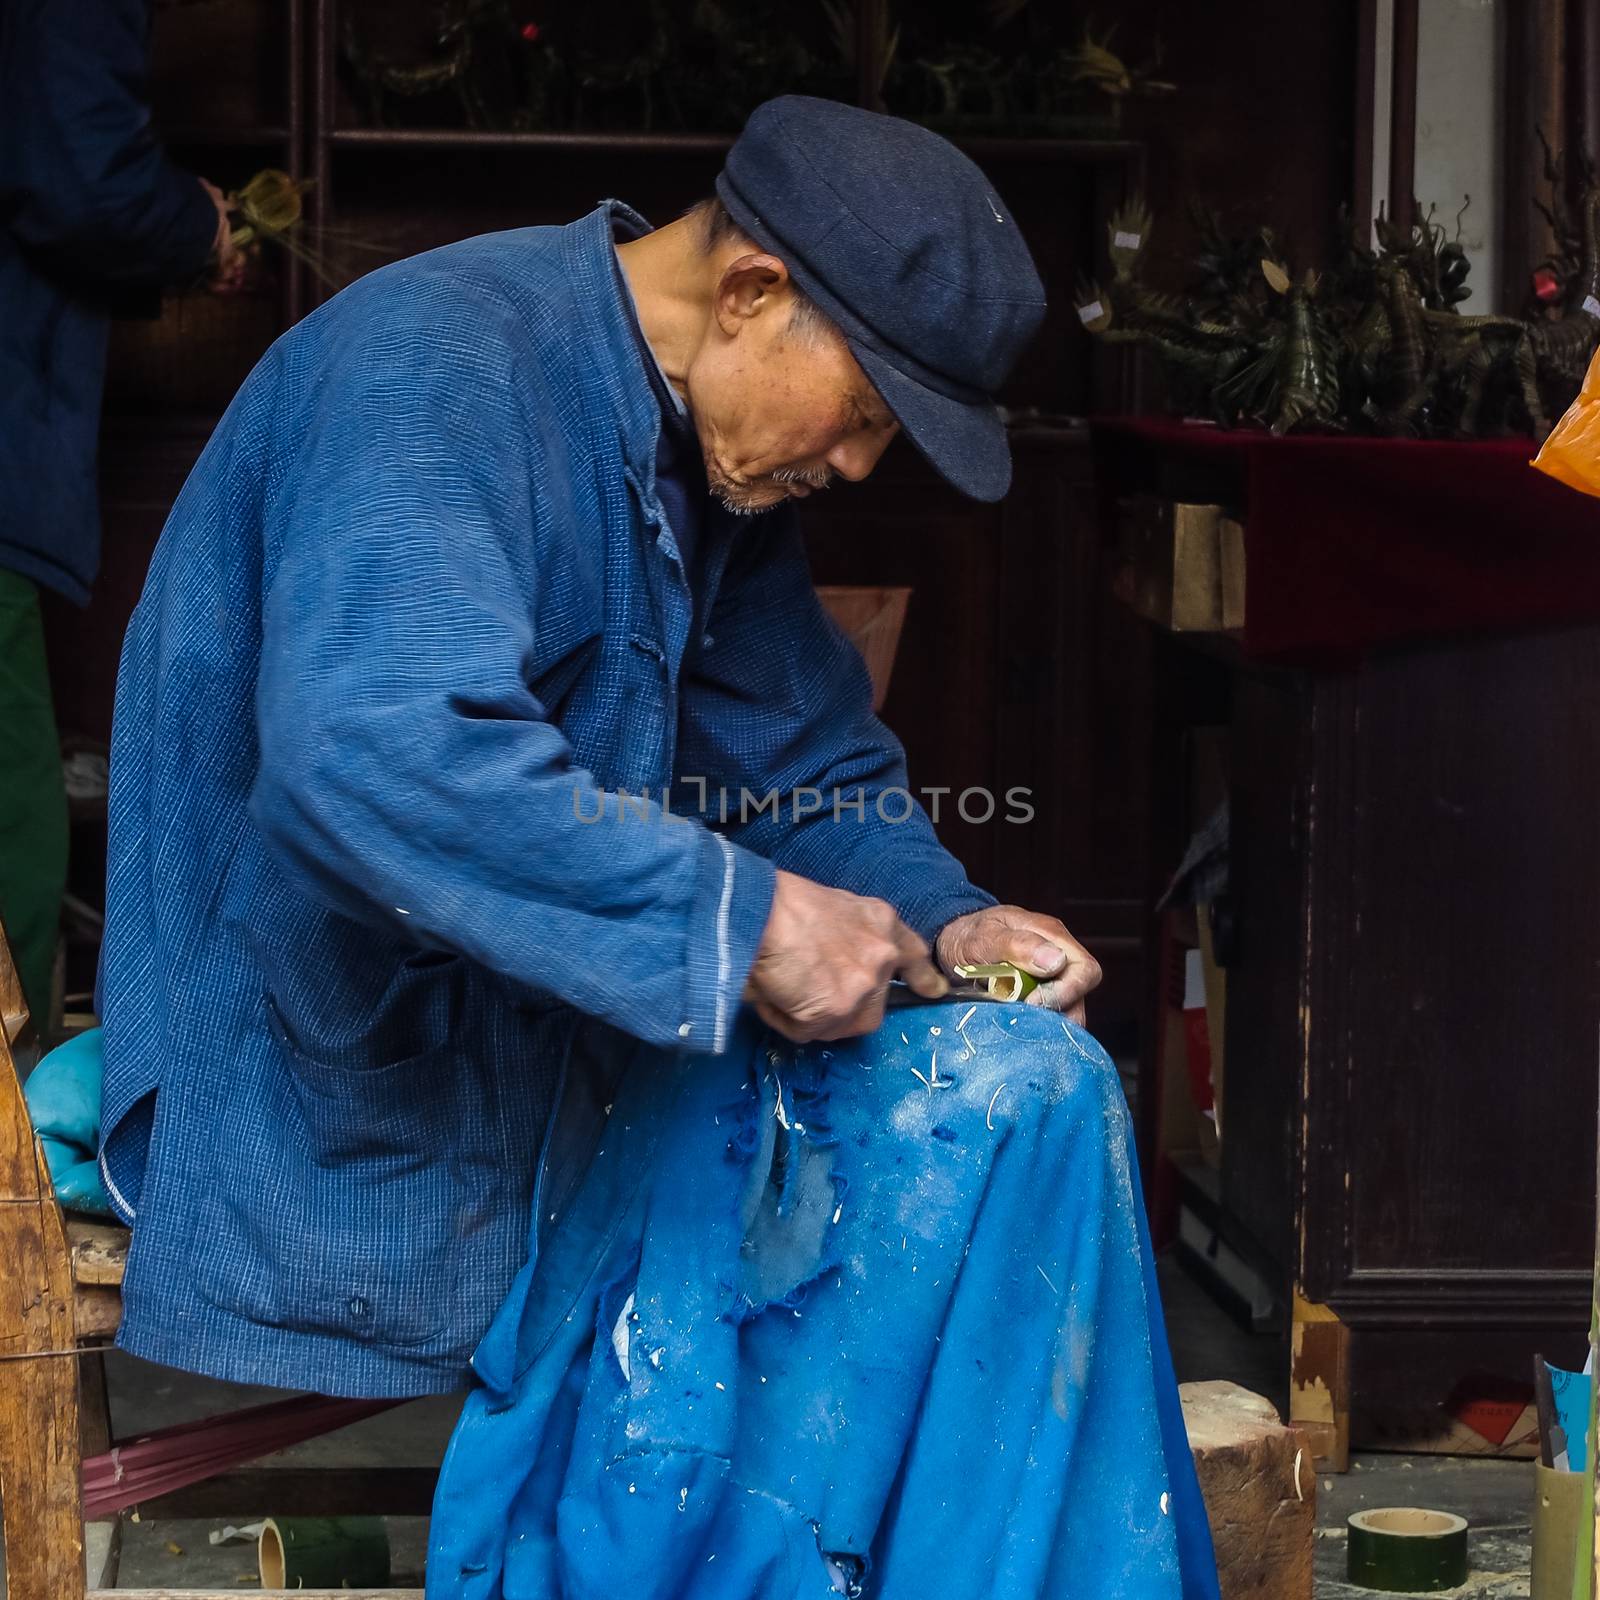 ZHOUZHUANG, SHANGHAI - April 11, 2011 : Zhouzhuang, the ancient water village is Shanghai tourist attraction with 1,000,000 visitors per year and there are a lot of variety activities have done here, in this image, the old Craftman is working